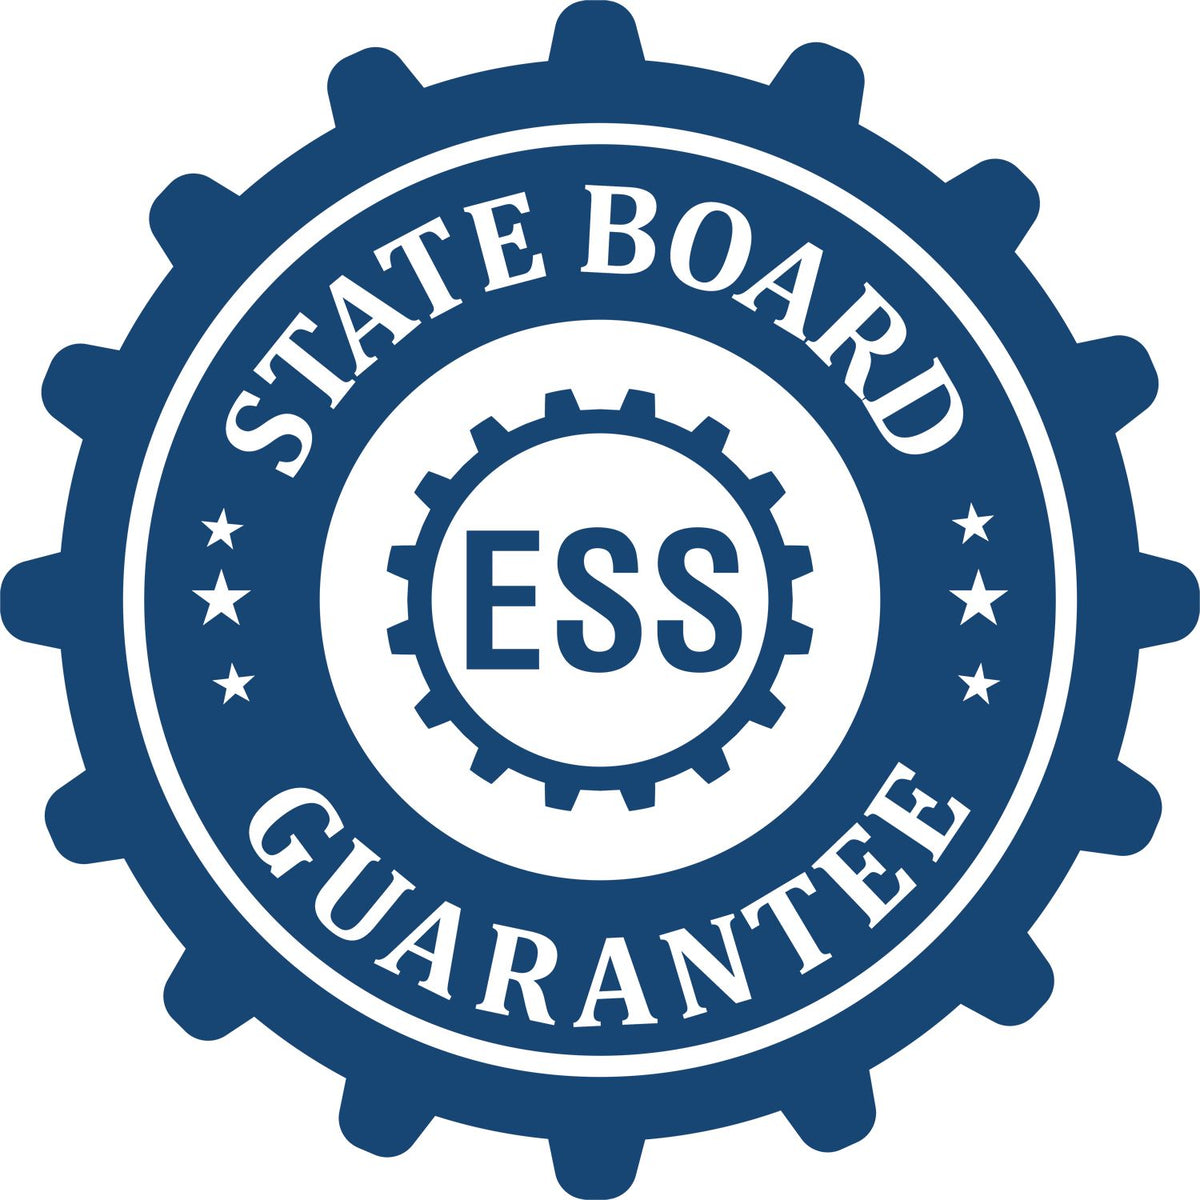 An emblem in a gear shape illustrating a state board guarantee for the Heavy-Duty Virginia Rectangular Notary Stamp product.